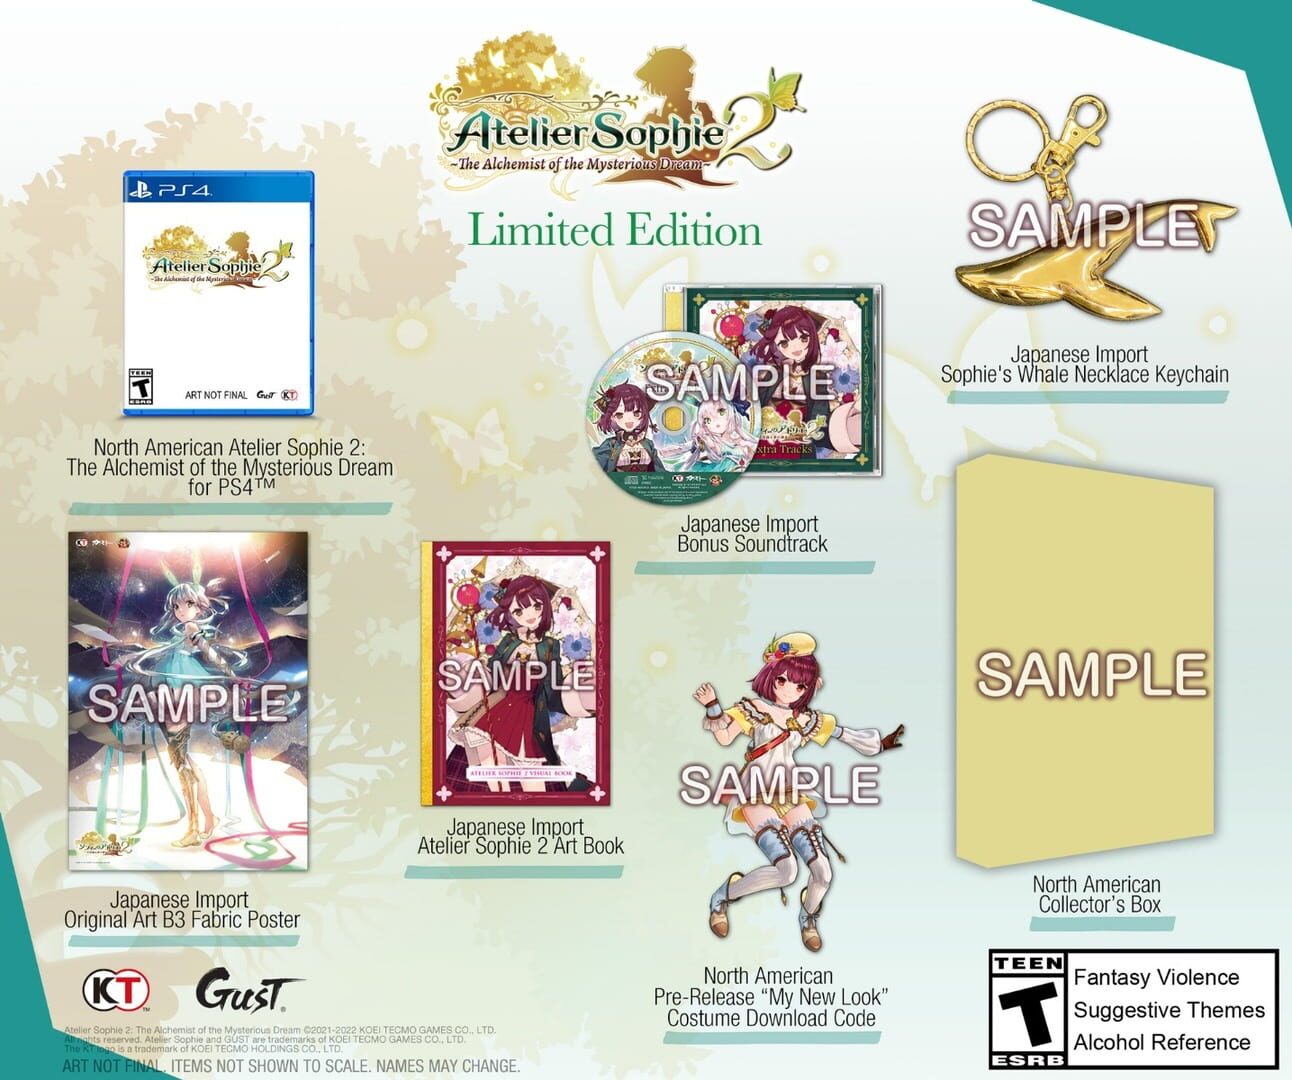 Atelier Sophie 2: The Alchemist of the Mysterious Dream - Limited Edition artwork